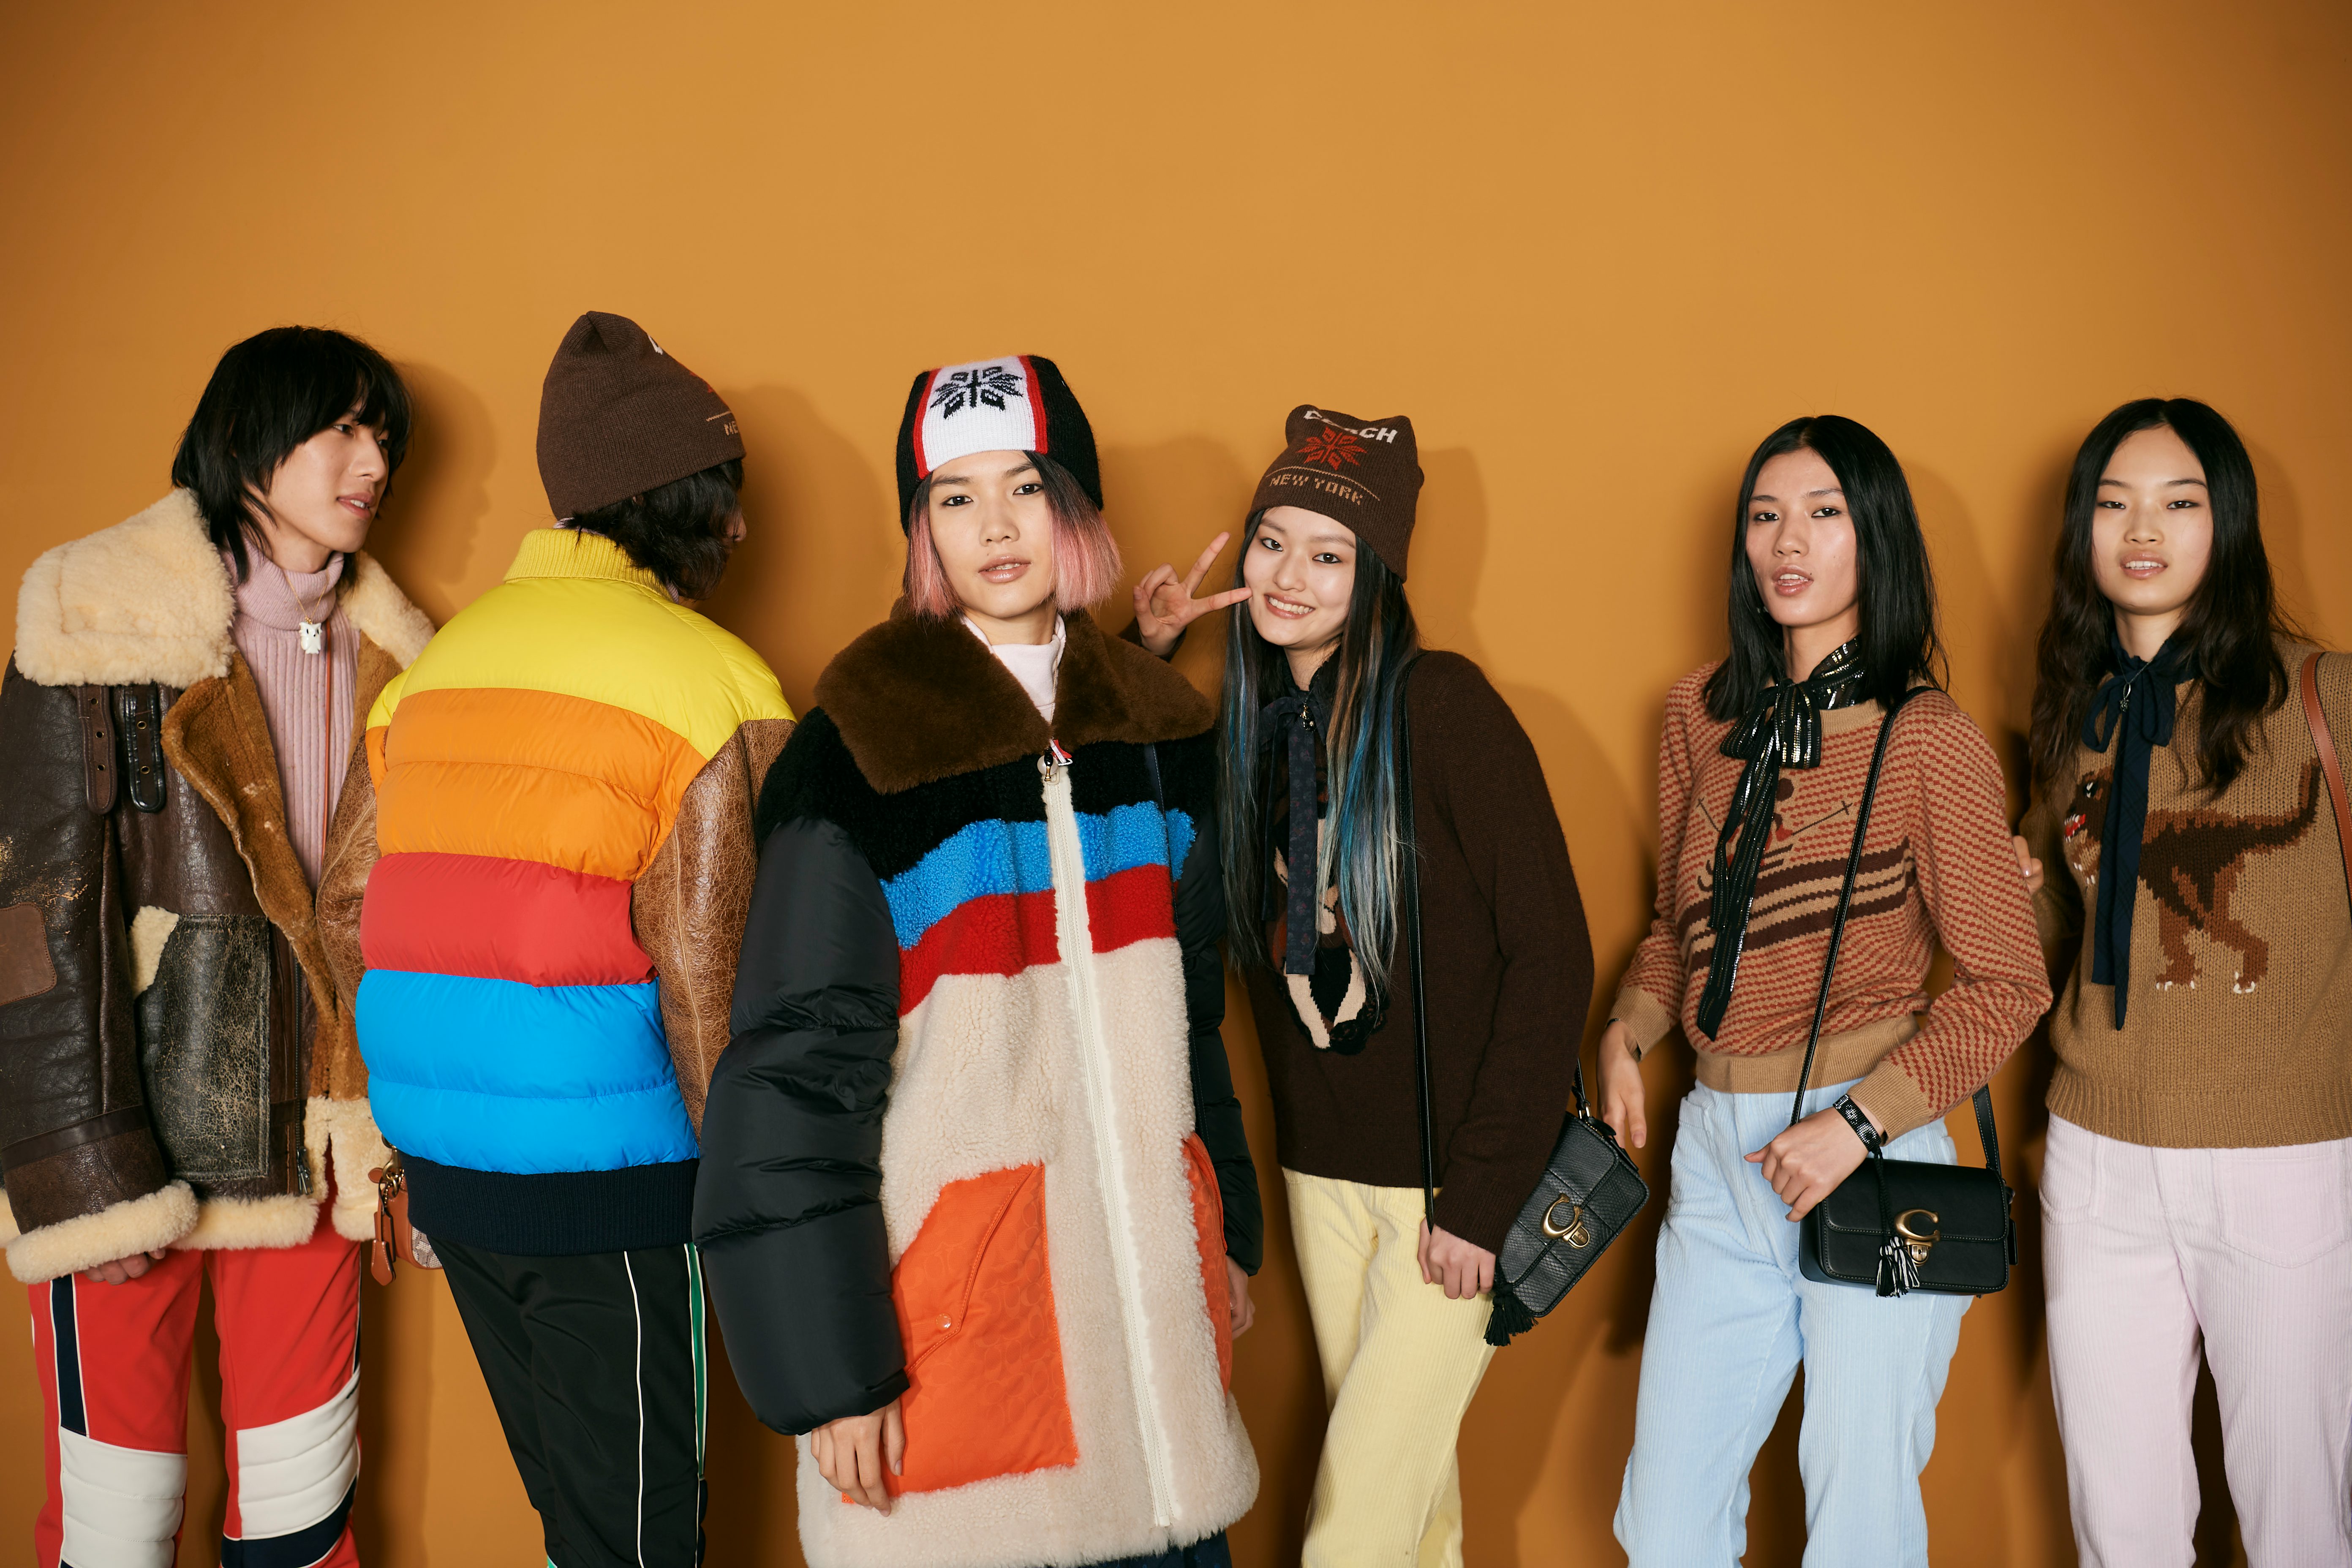 Coached debuted its Winter collection with a runway show in Shanghai and a new episode of Coach TV. Coach.